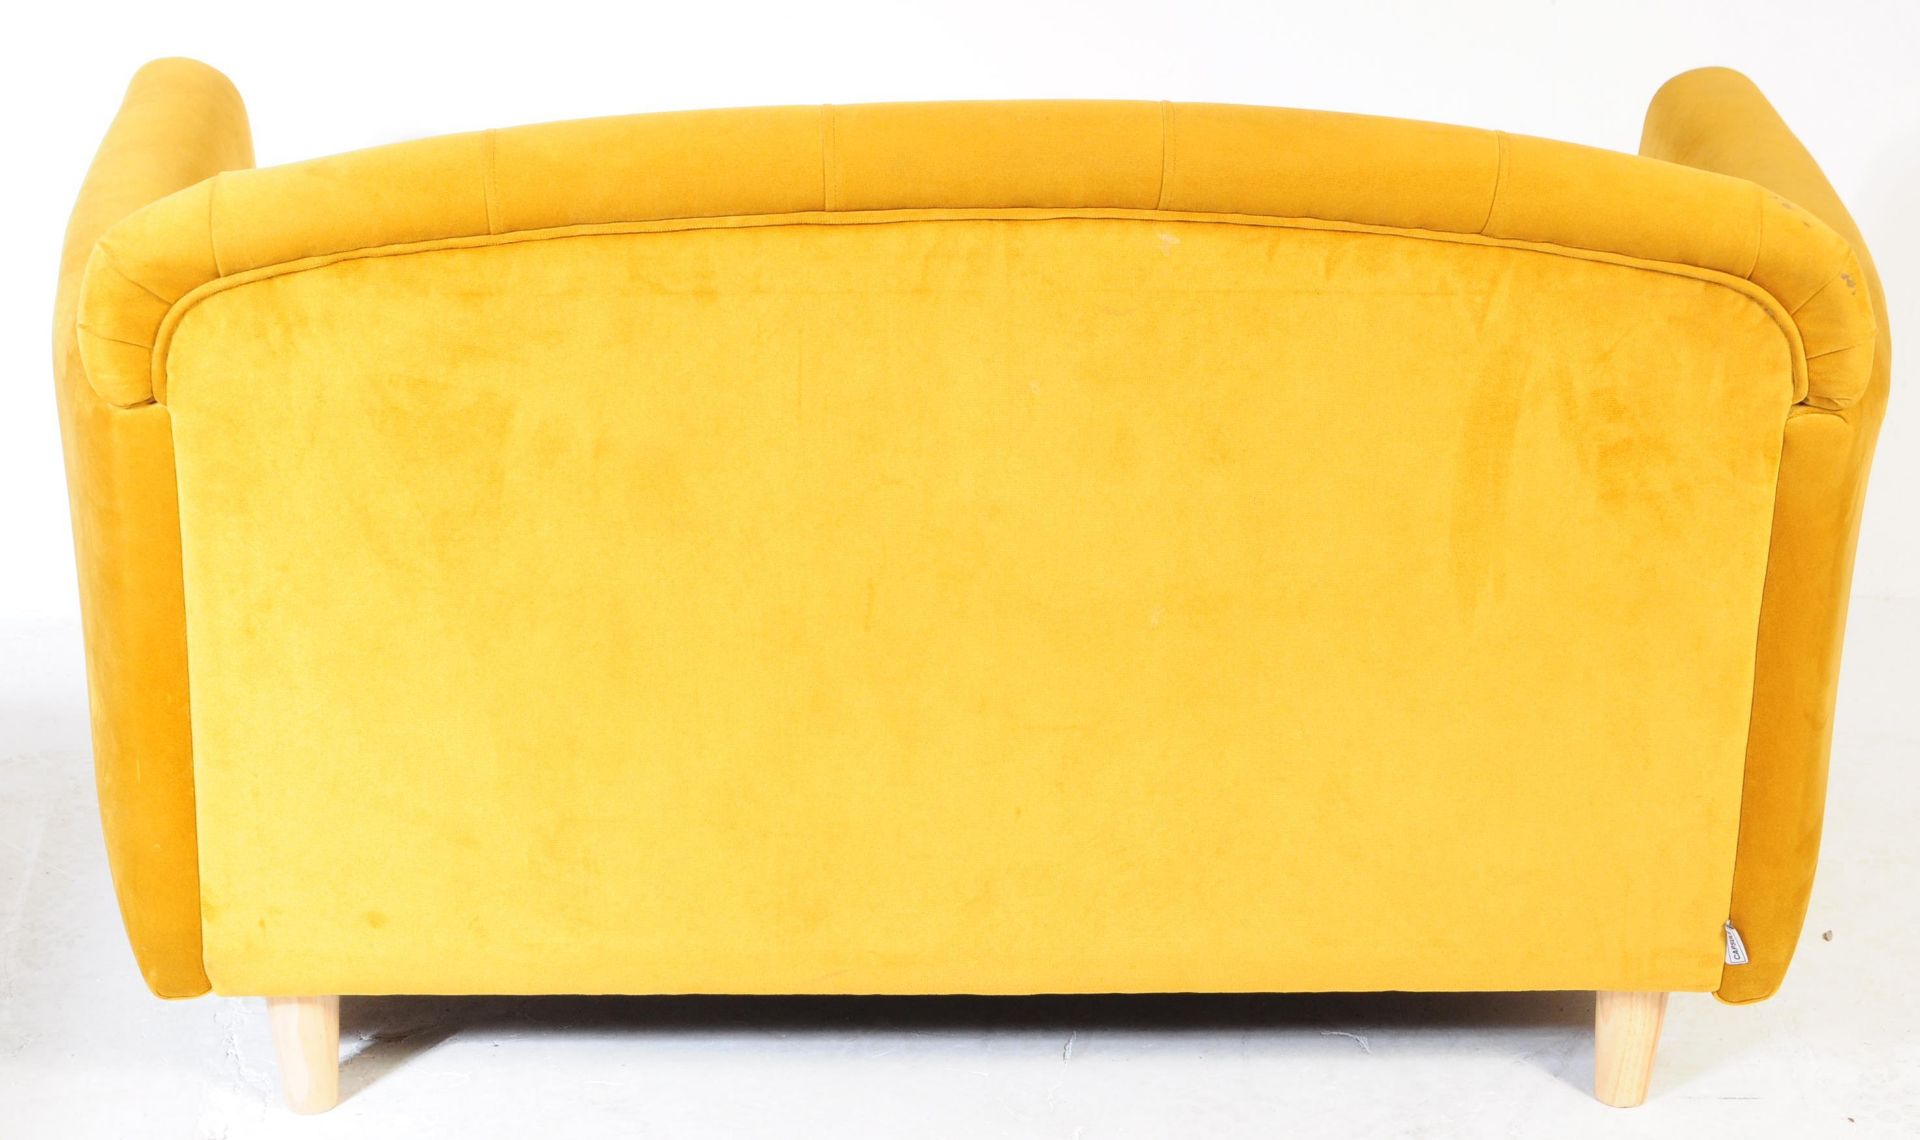 CONTEMPORARY MUSTARD YELLOW TWO SEATER SOFA - Image 4 of 6